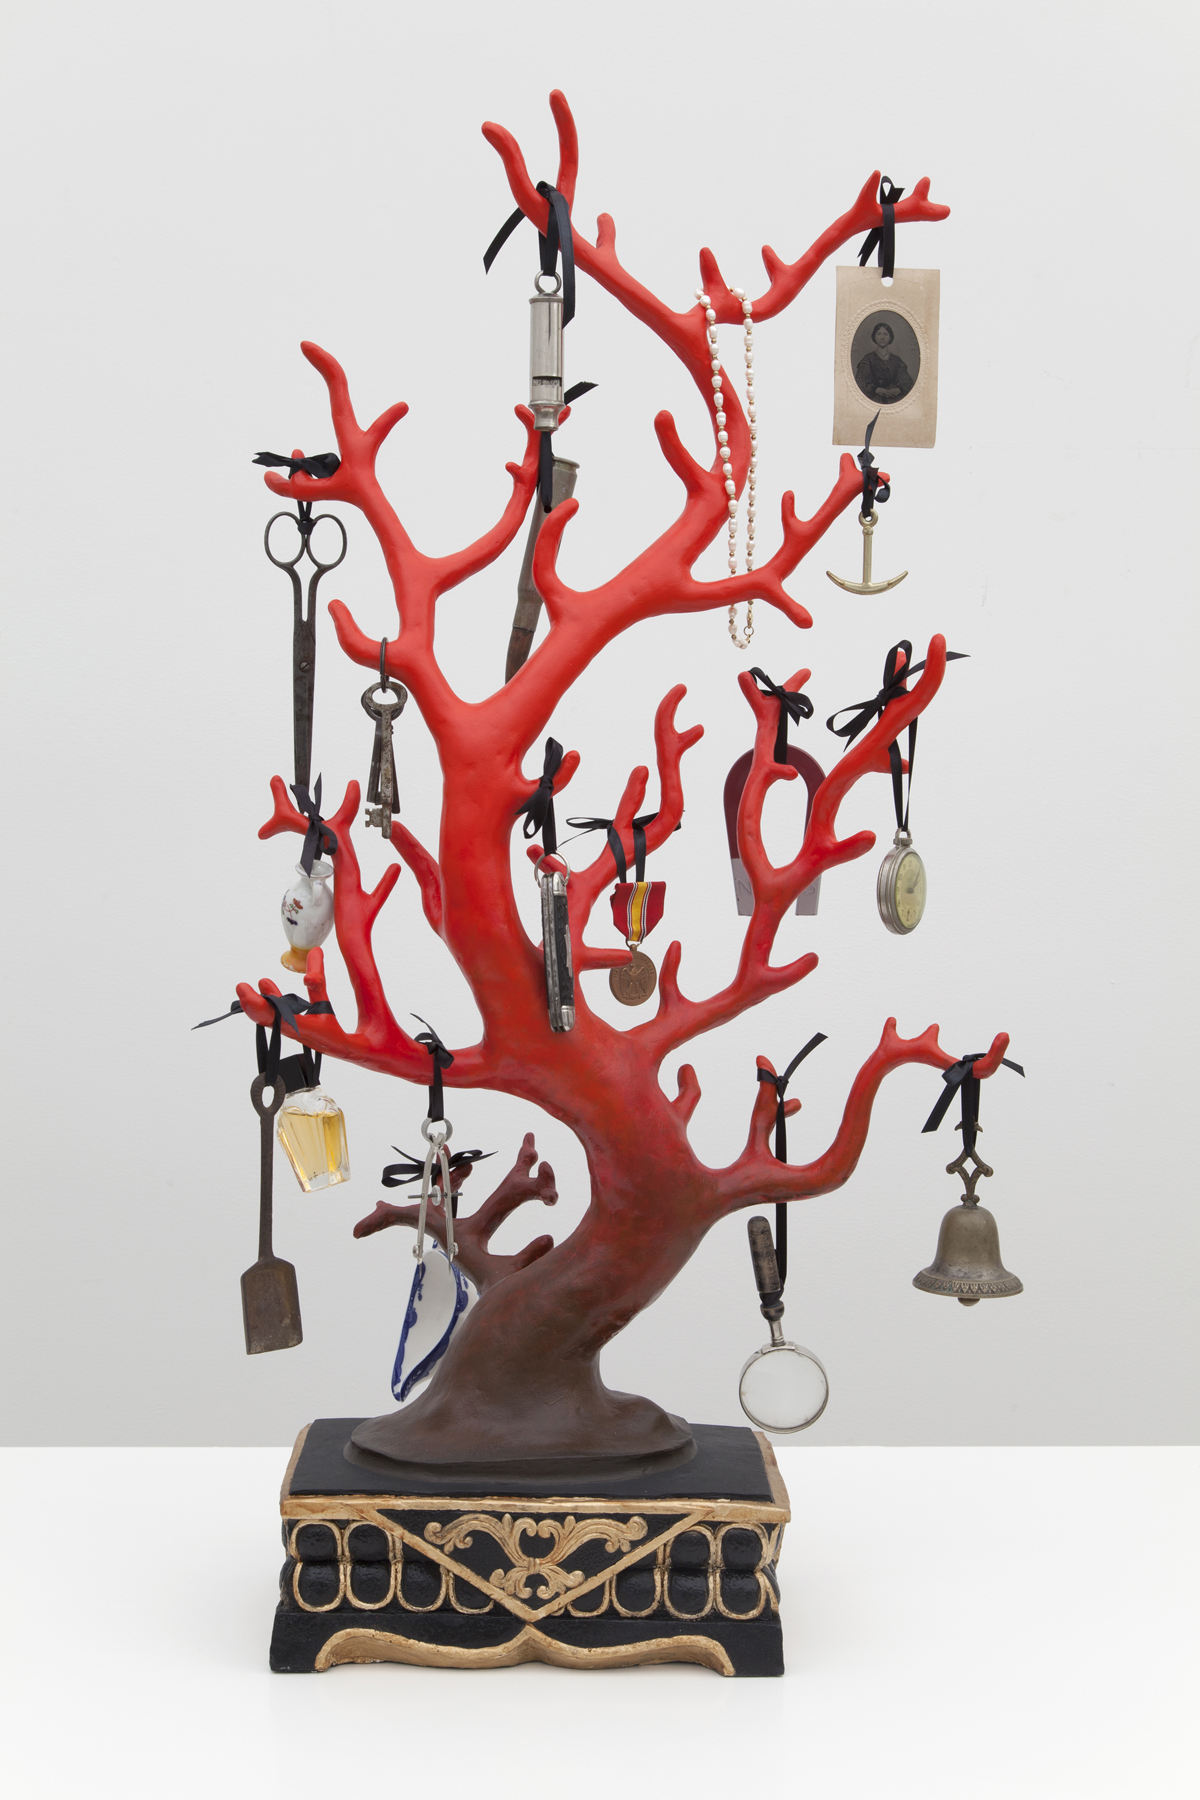 Mark Dion, Blood Red Coral, 2013